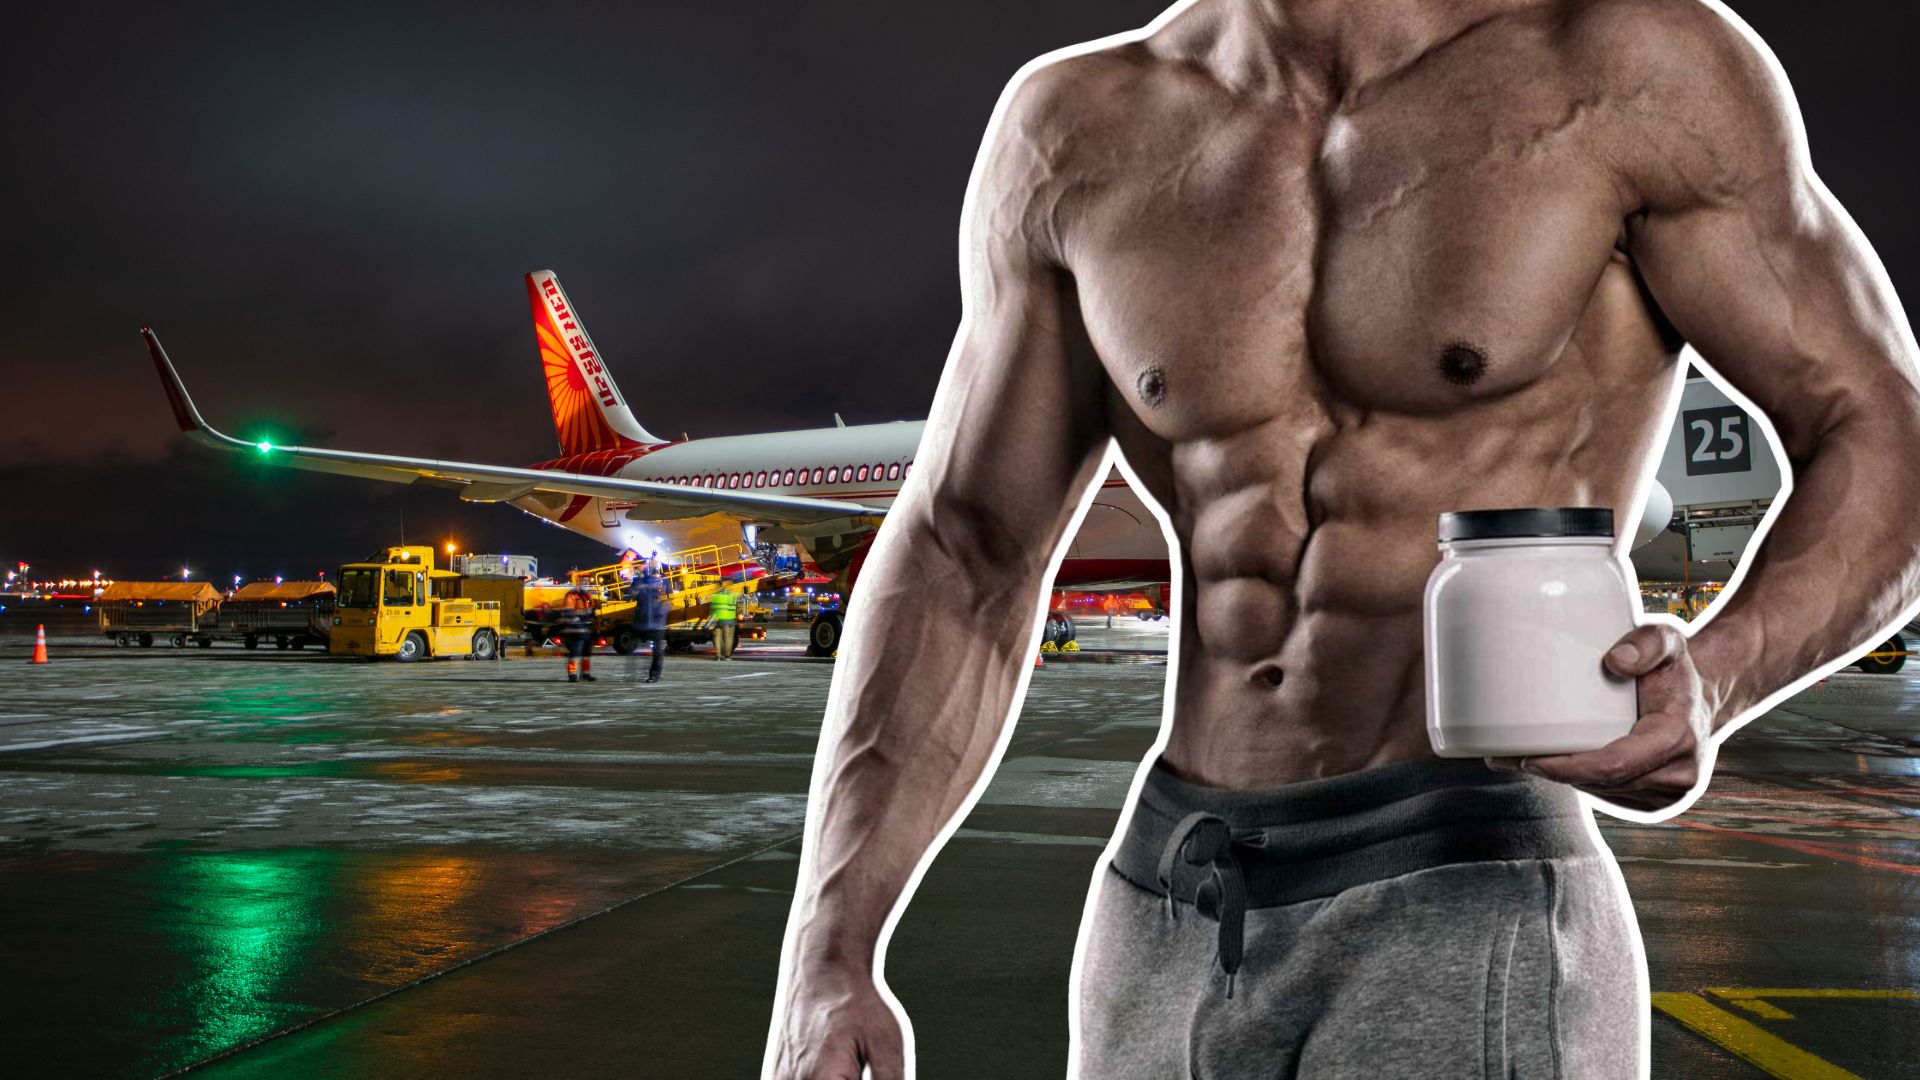 Flying with Creatine- Domestic and International Guidelines